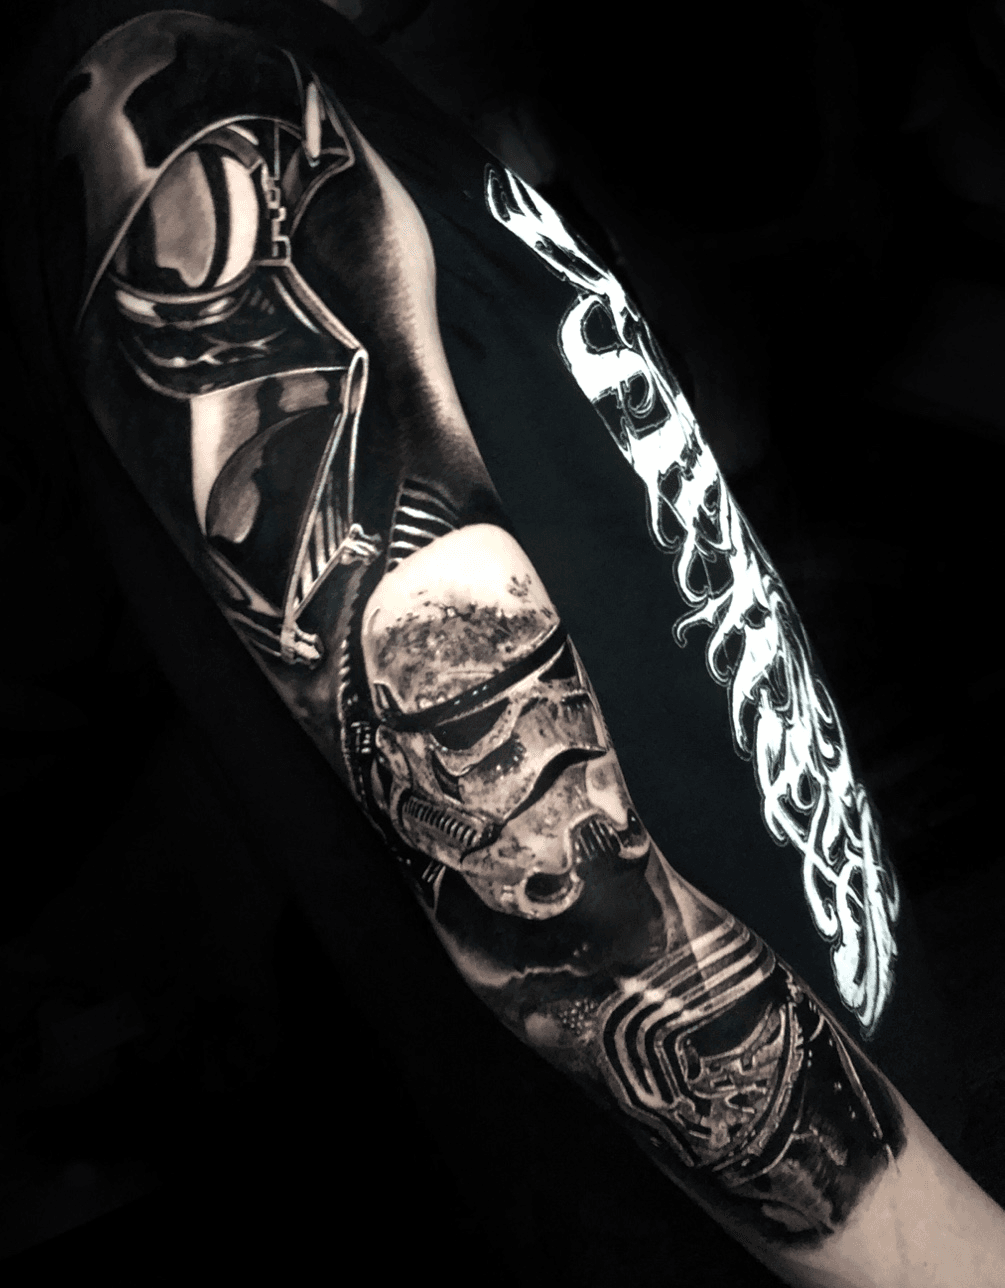 Otheser darkside tattoo society  OTII1A9TH Next stops   LithuaniaSpainFrance  Facebook